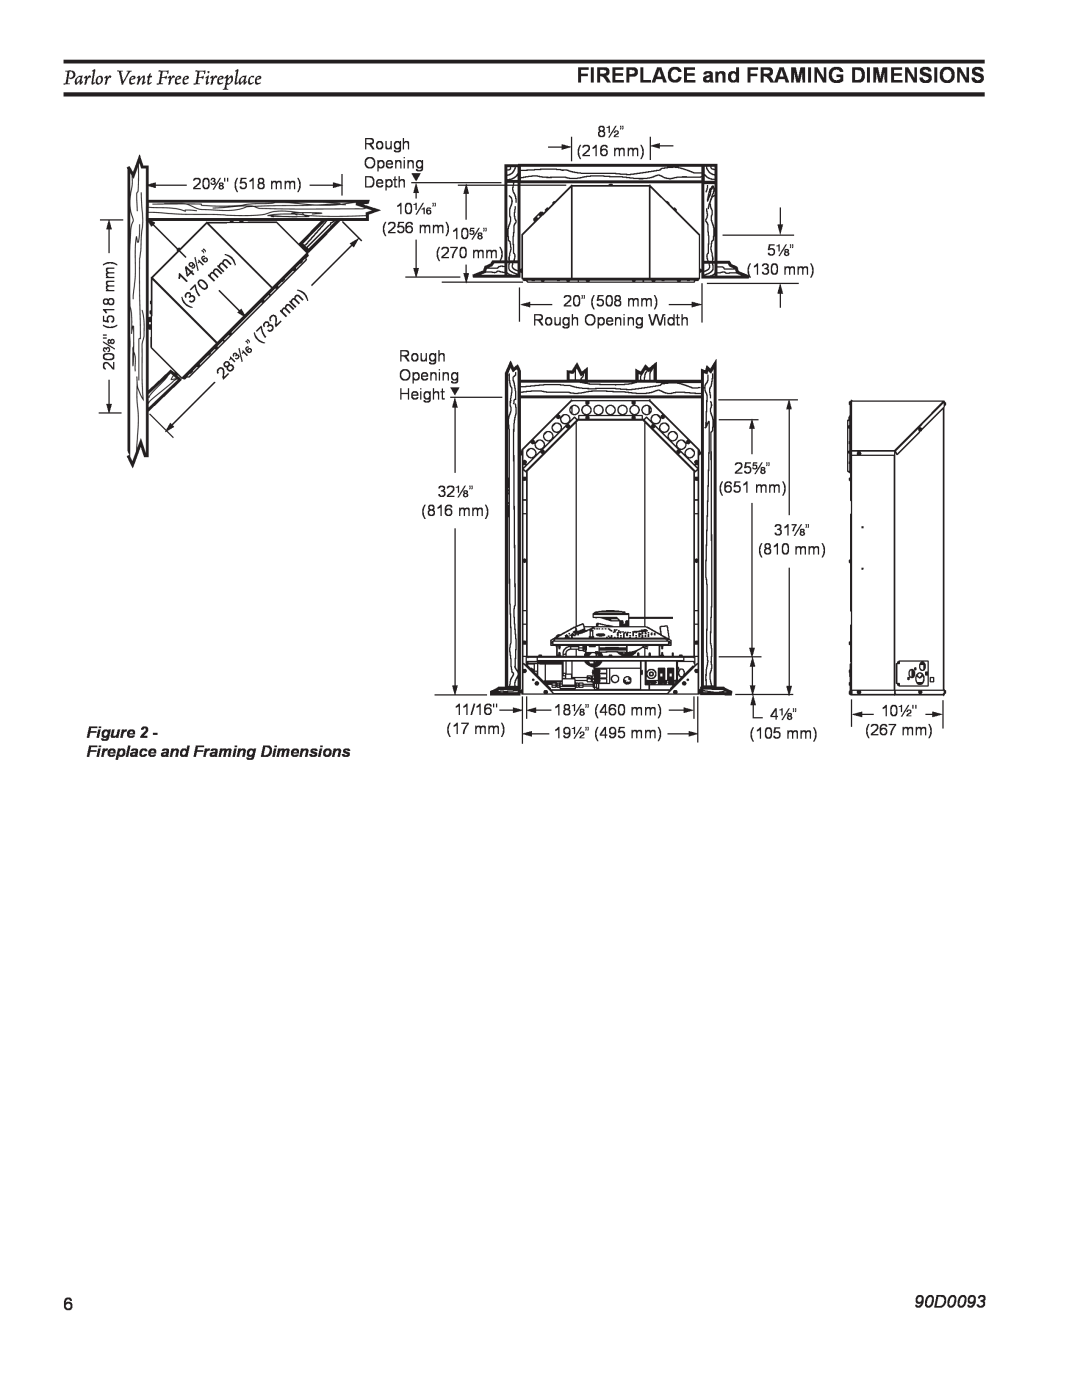 Monessen Hearth PL20 operating instructions Parlor Vent Free Fireplace, FIREPLACE and FRAMING DIMENSIONS, 90D0093 